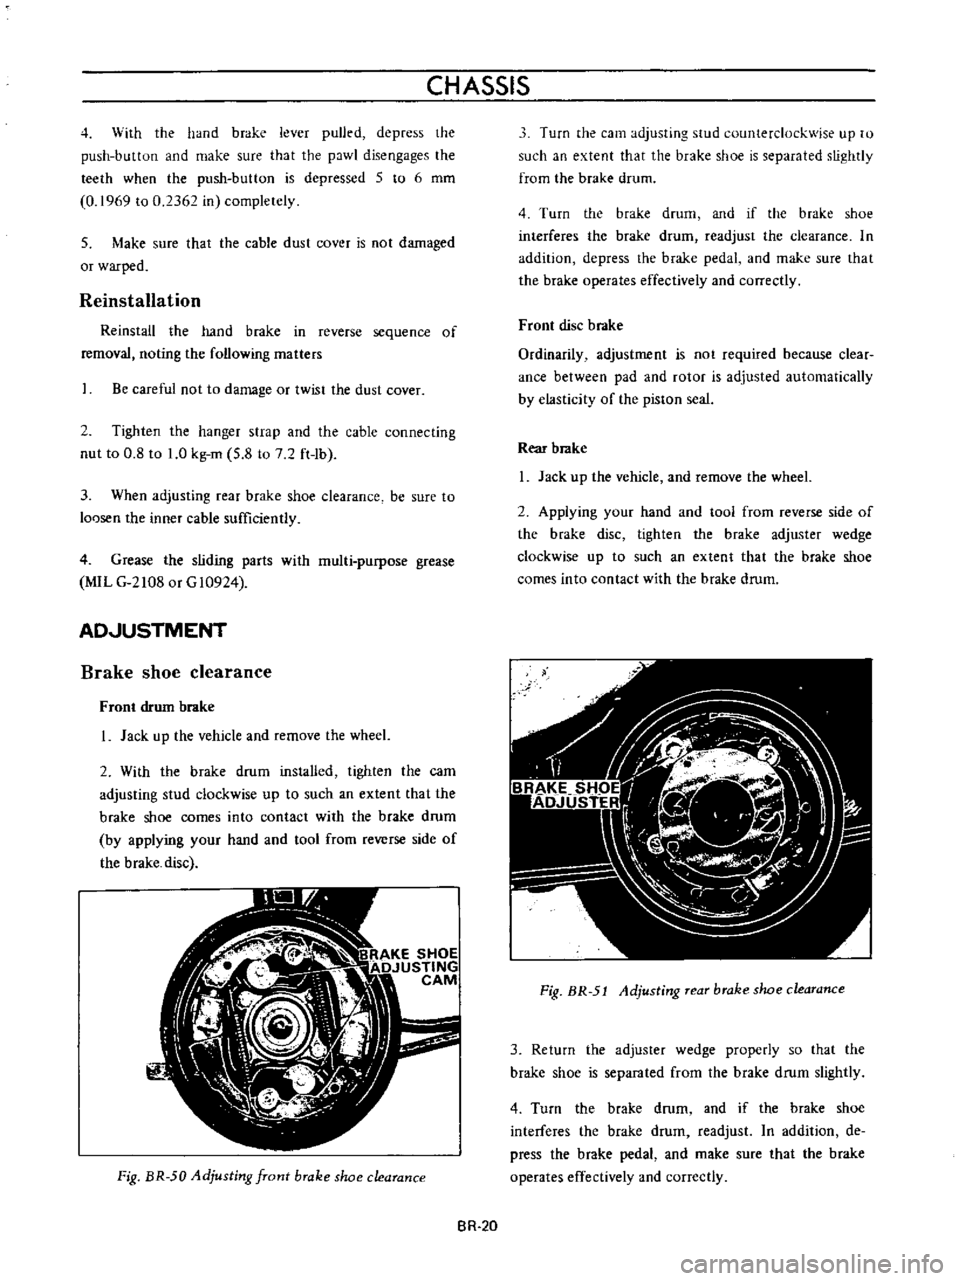 DATSUN B110 1973  Service Owners Manual 
CHASSIS

4

With 
the

hand 
brake 
lever

pulled 
depress 
the

push 
button 
and 
make 
sure 
that 
the

pawl 
disengages 
the

teeth 
when 
the

push 
button 
is

depressed 
5

to 
6 
mm

0

1969 